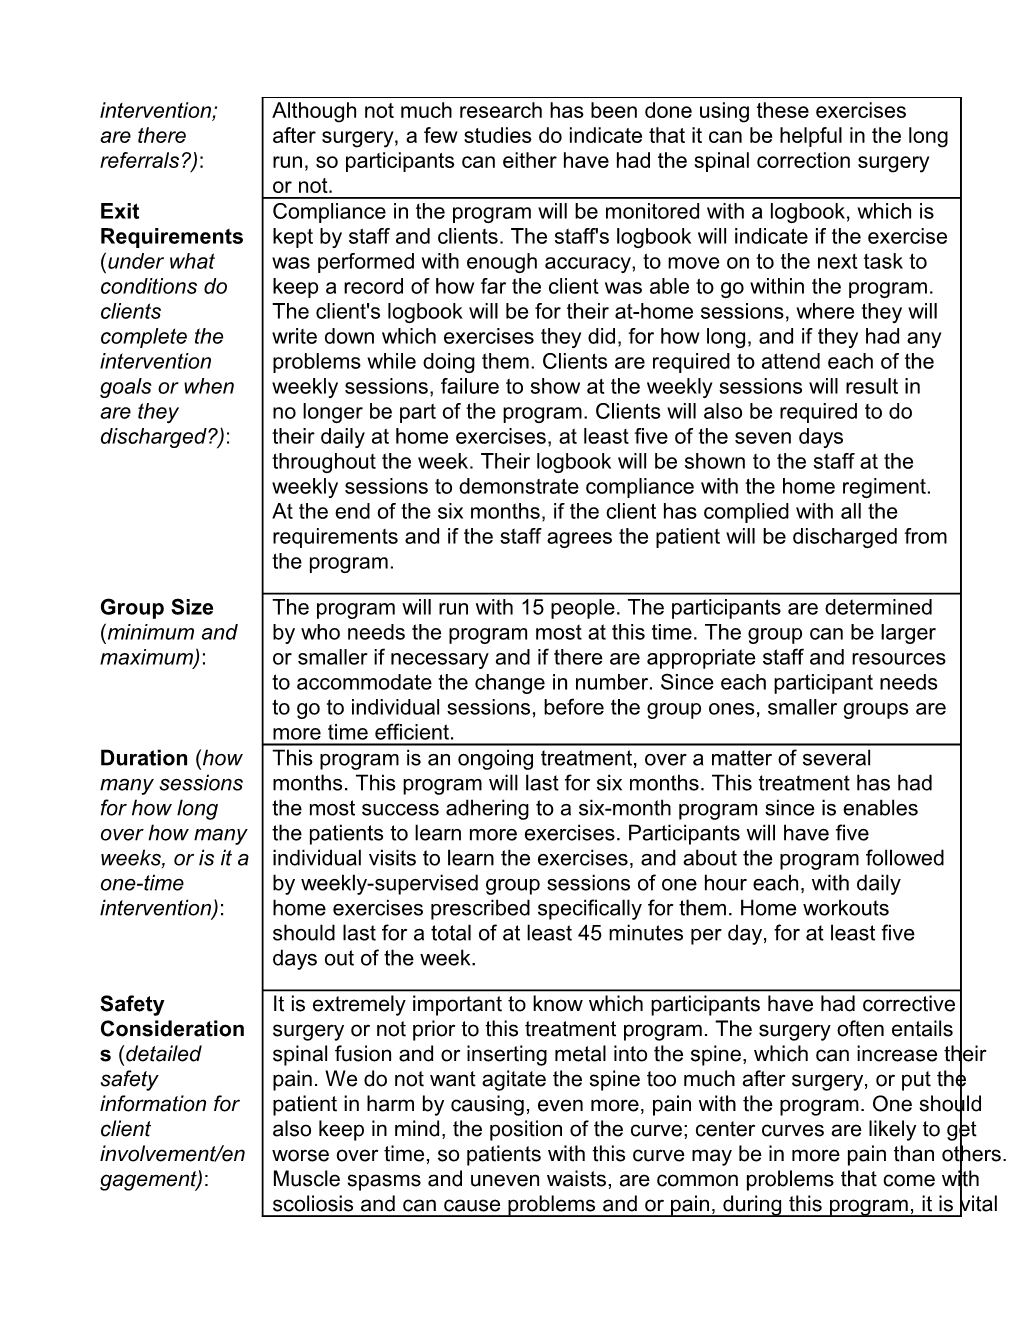 Protocol Template for RT Interventions